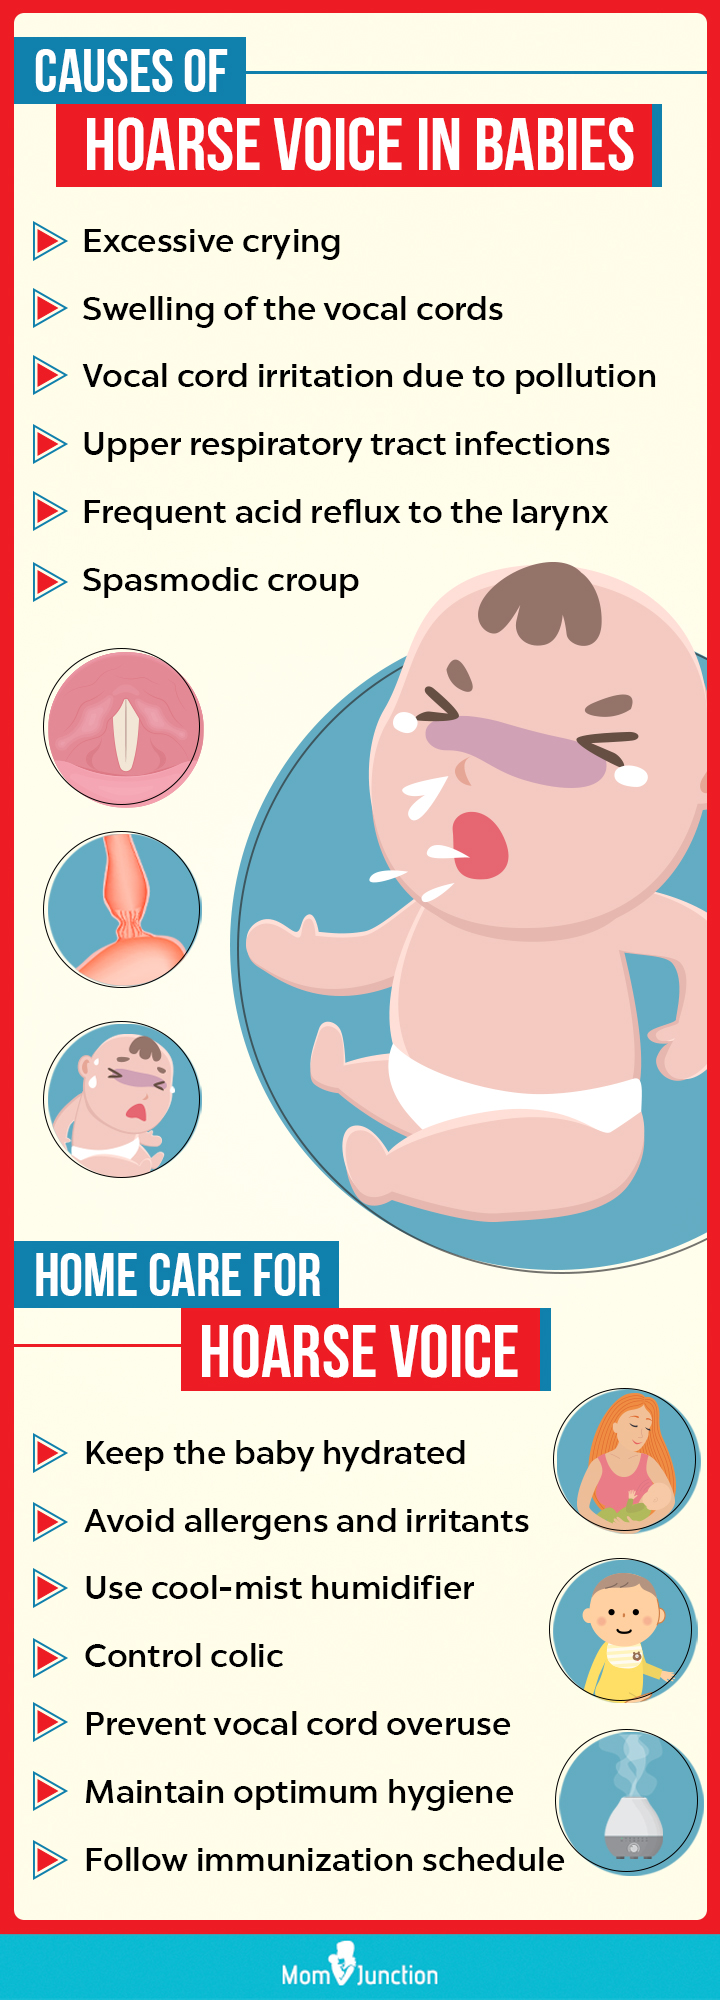 causes of hoarse voice in babies [Infographic]